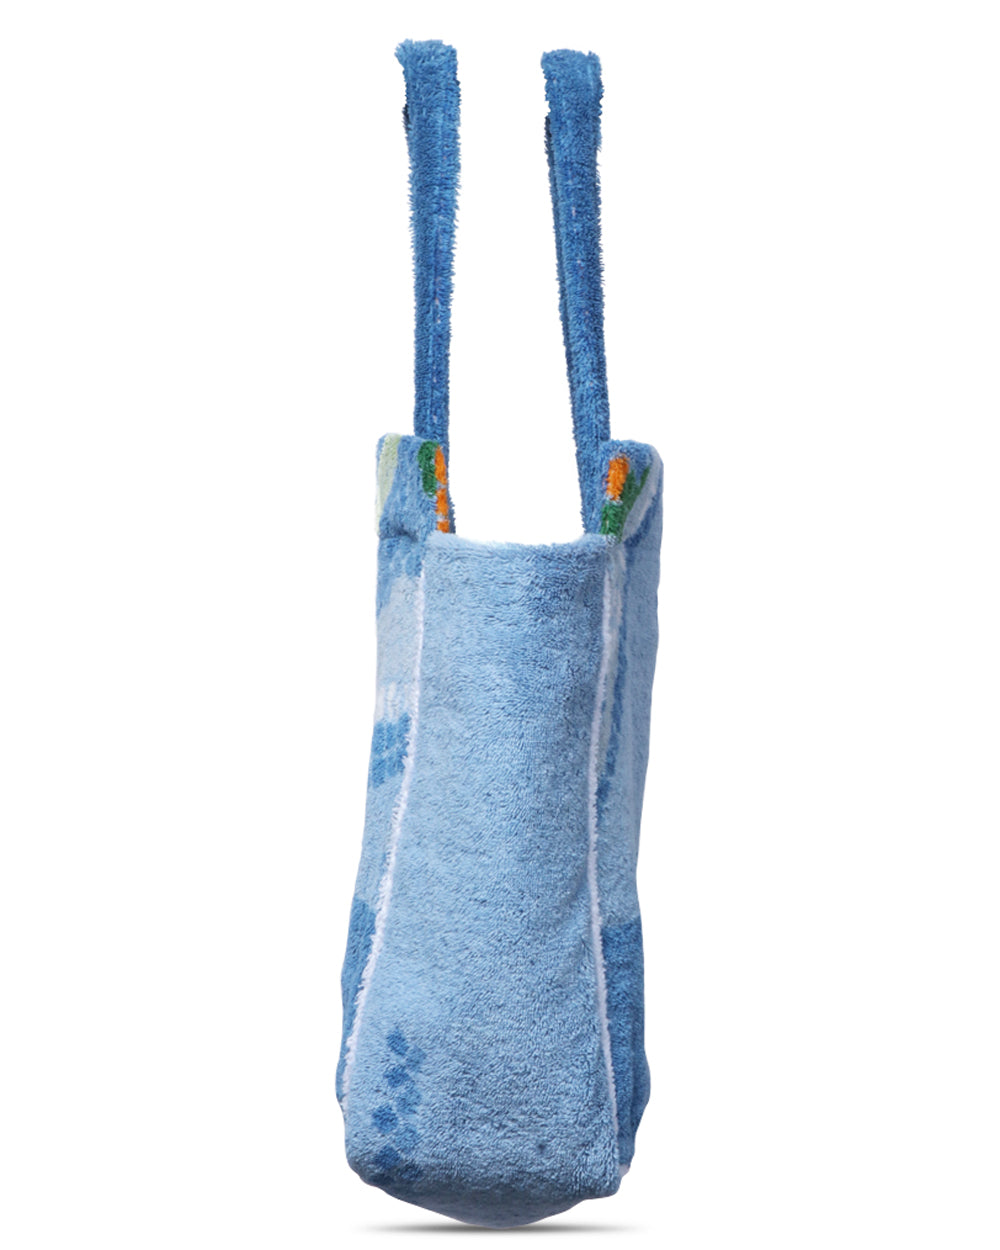 Terry Cloth Cabana Tote in Light Blue or Navy Colorblock